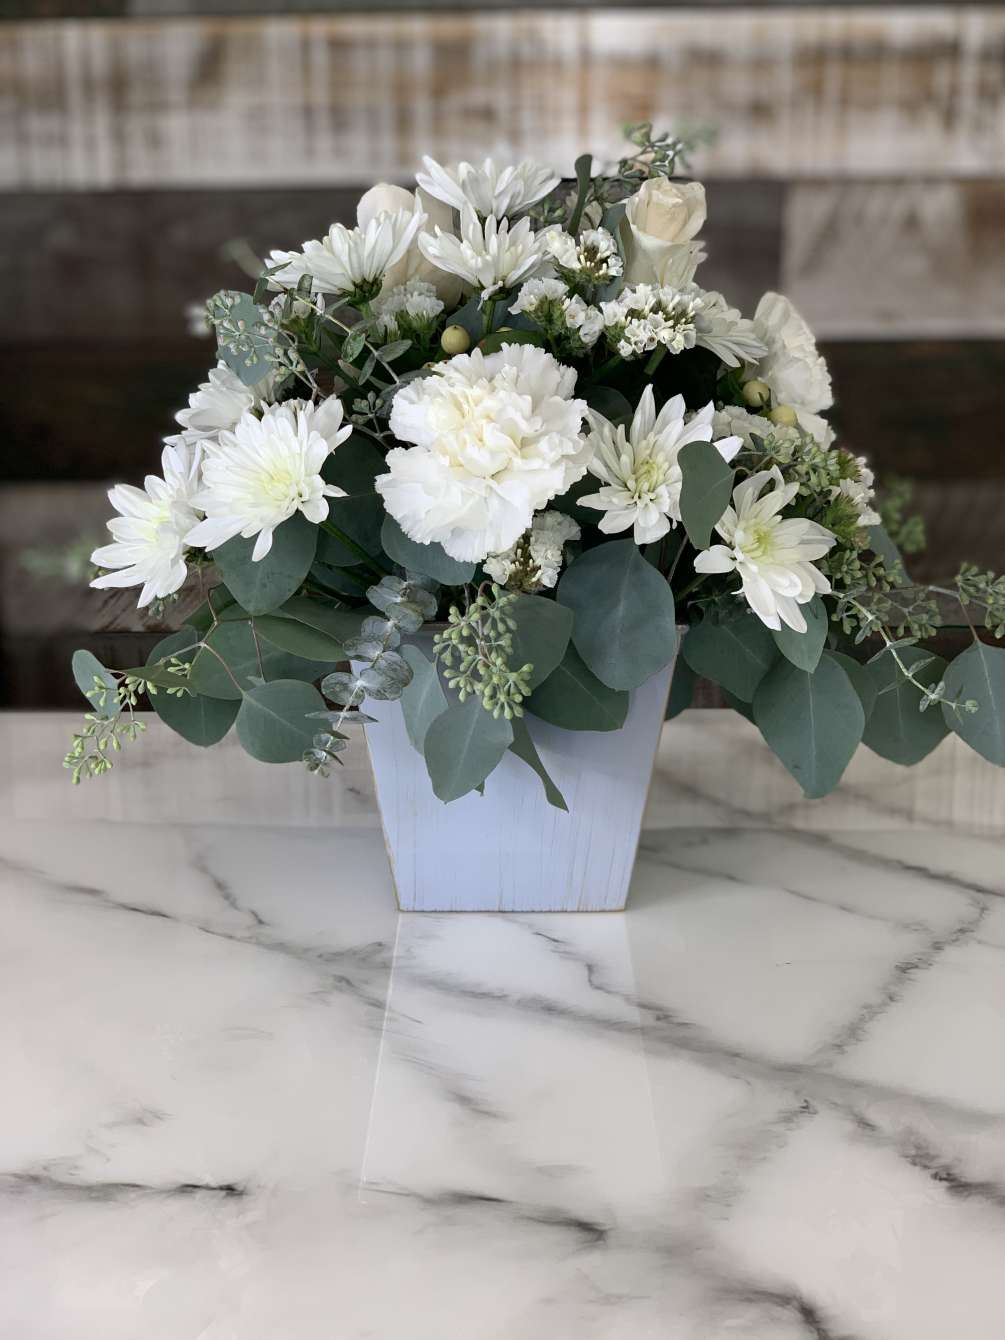 All white roses, carnations, hypericum berries, and mums with assorted greenery.